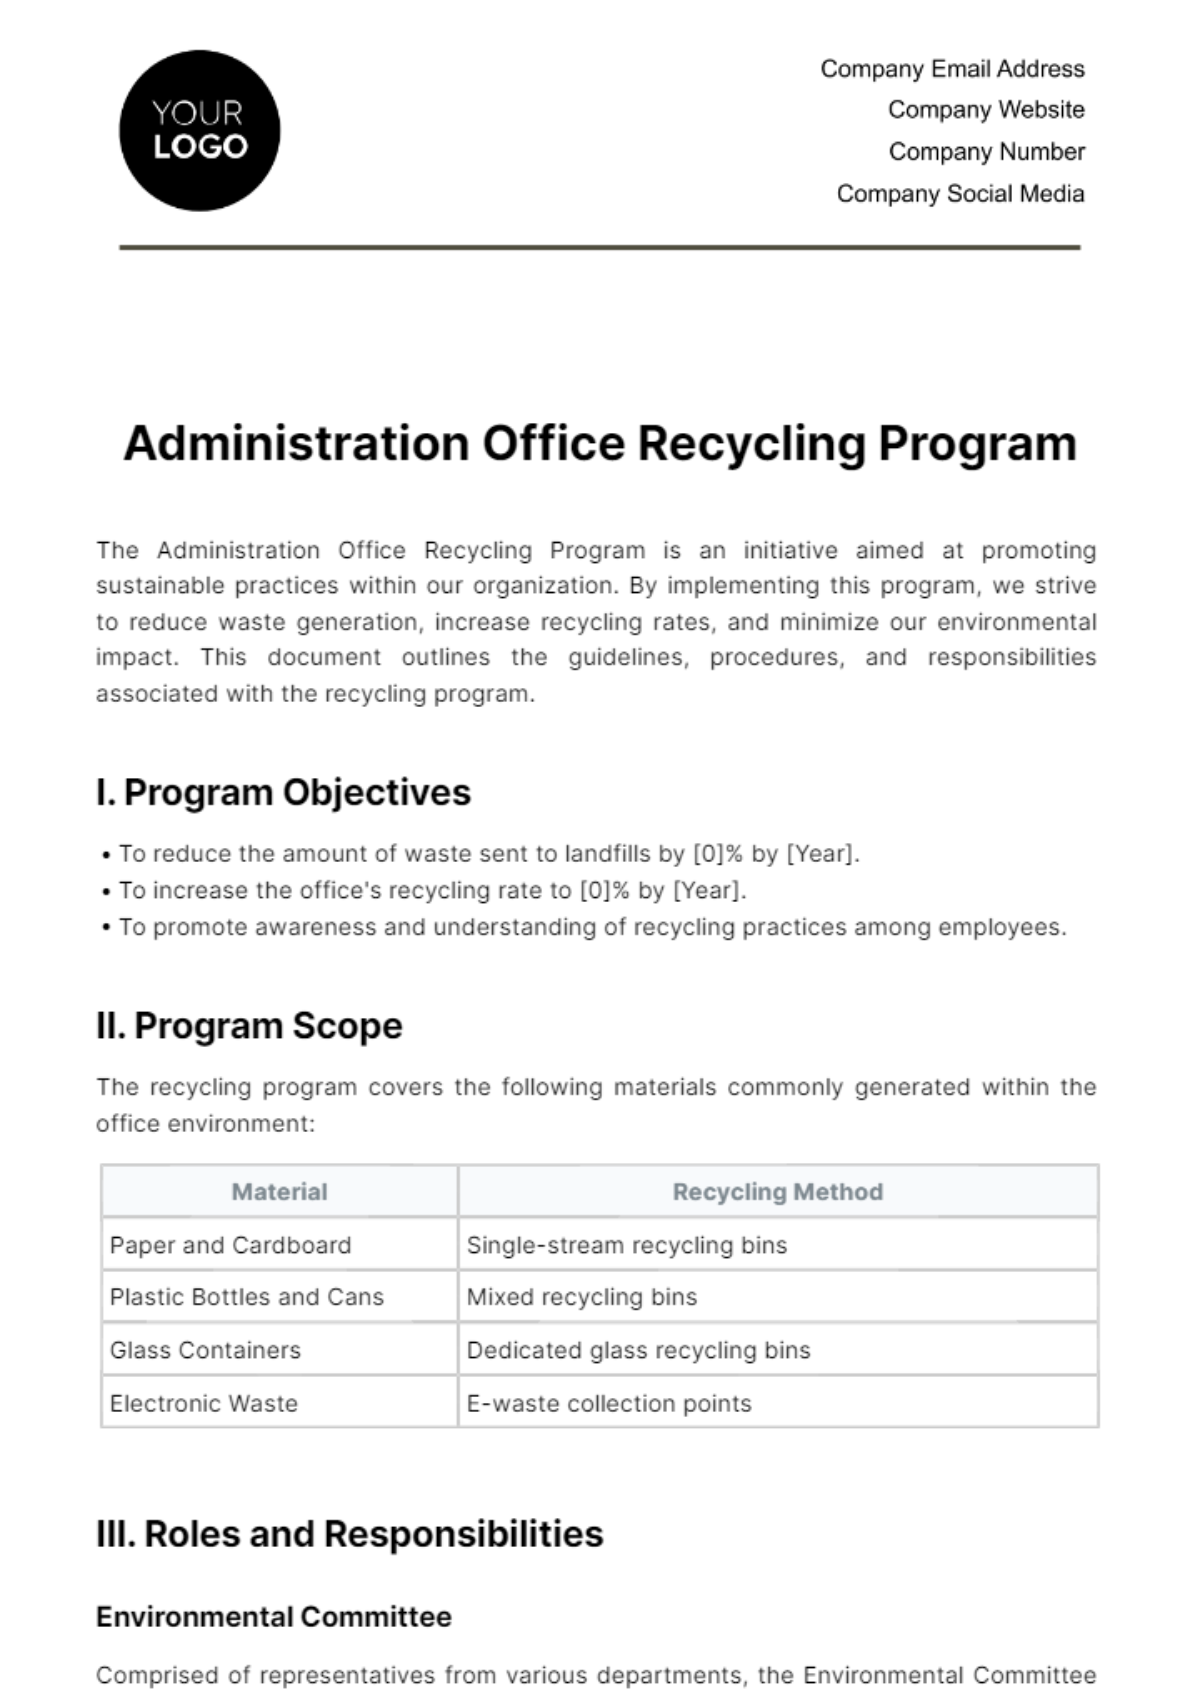 Free Administration Office Recycling Program Template